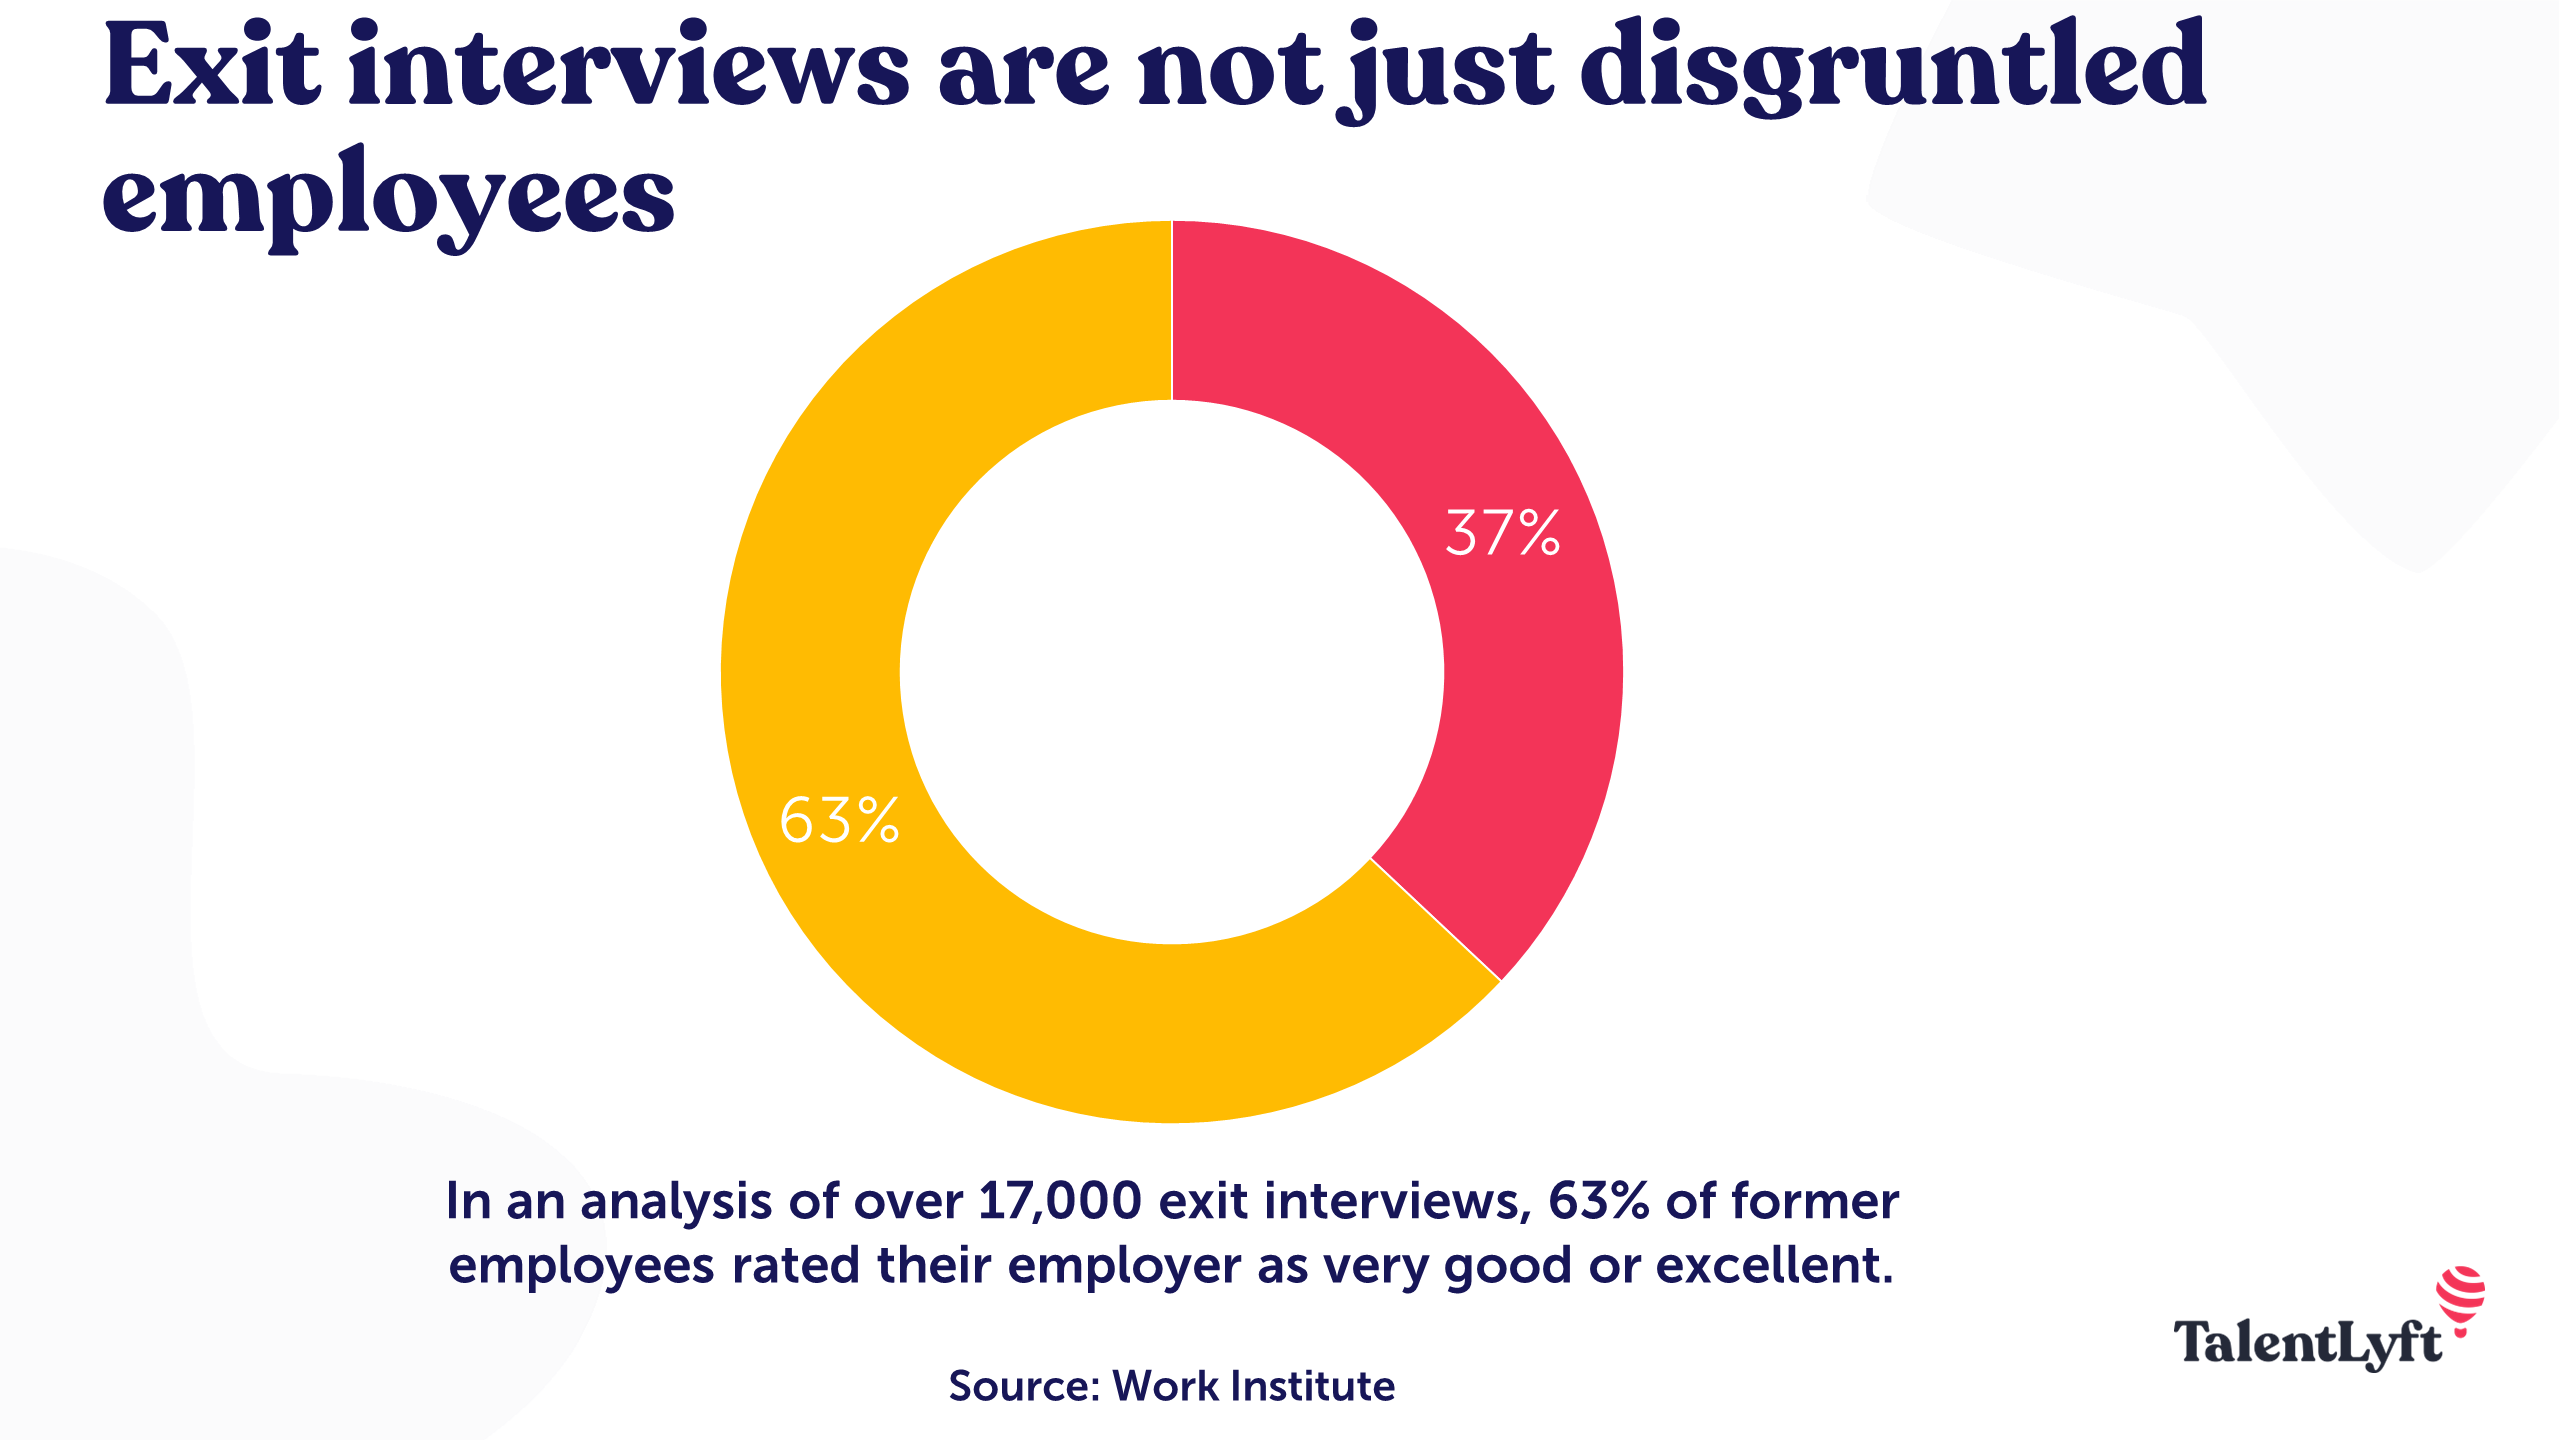 Exit interview are not just disgruntled employees